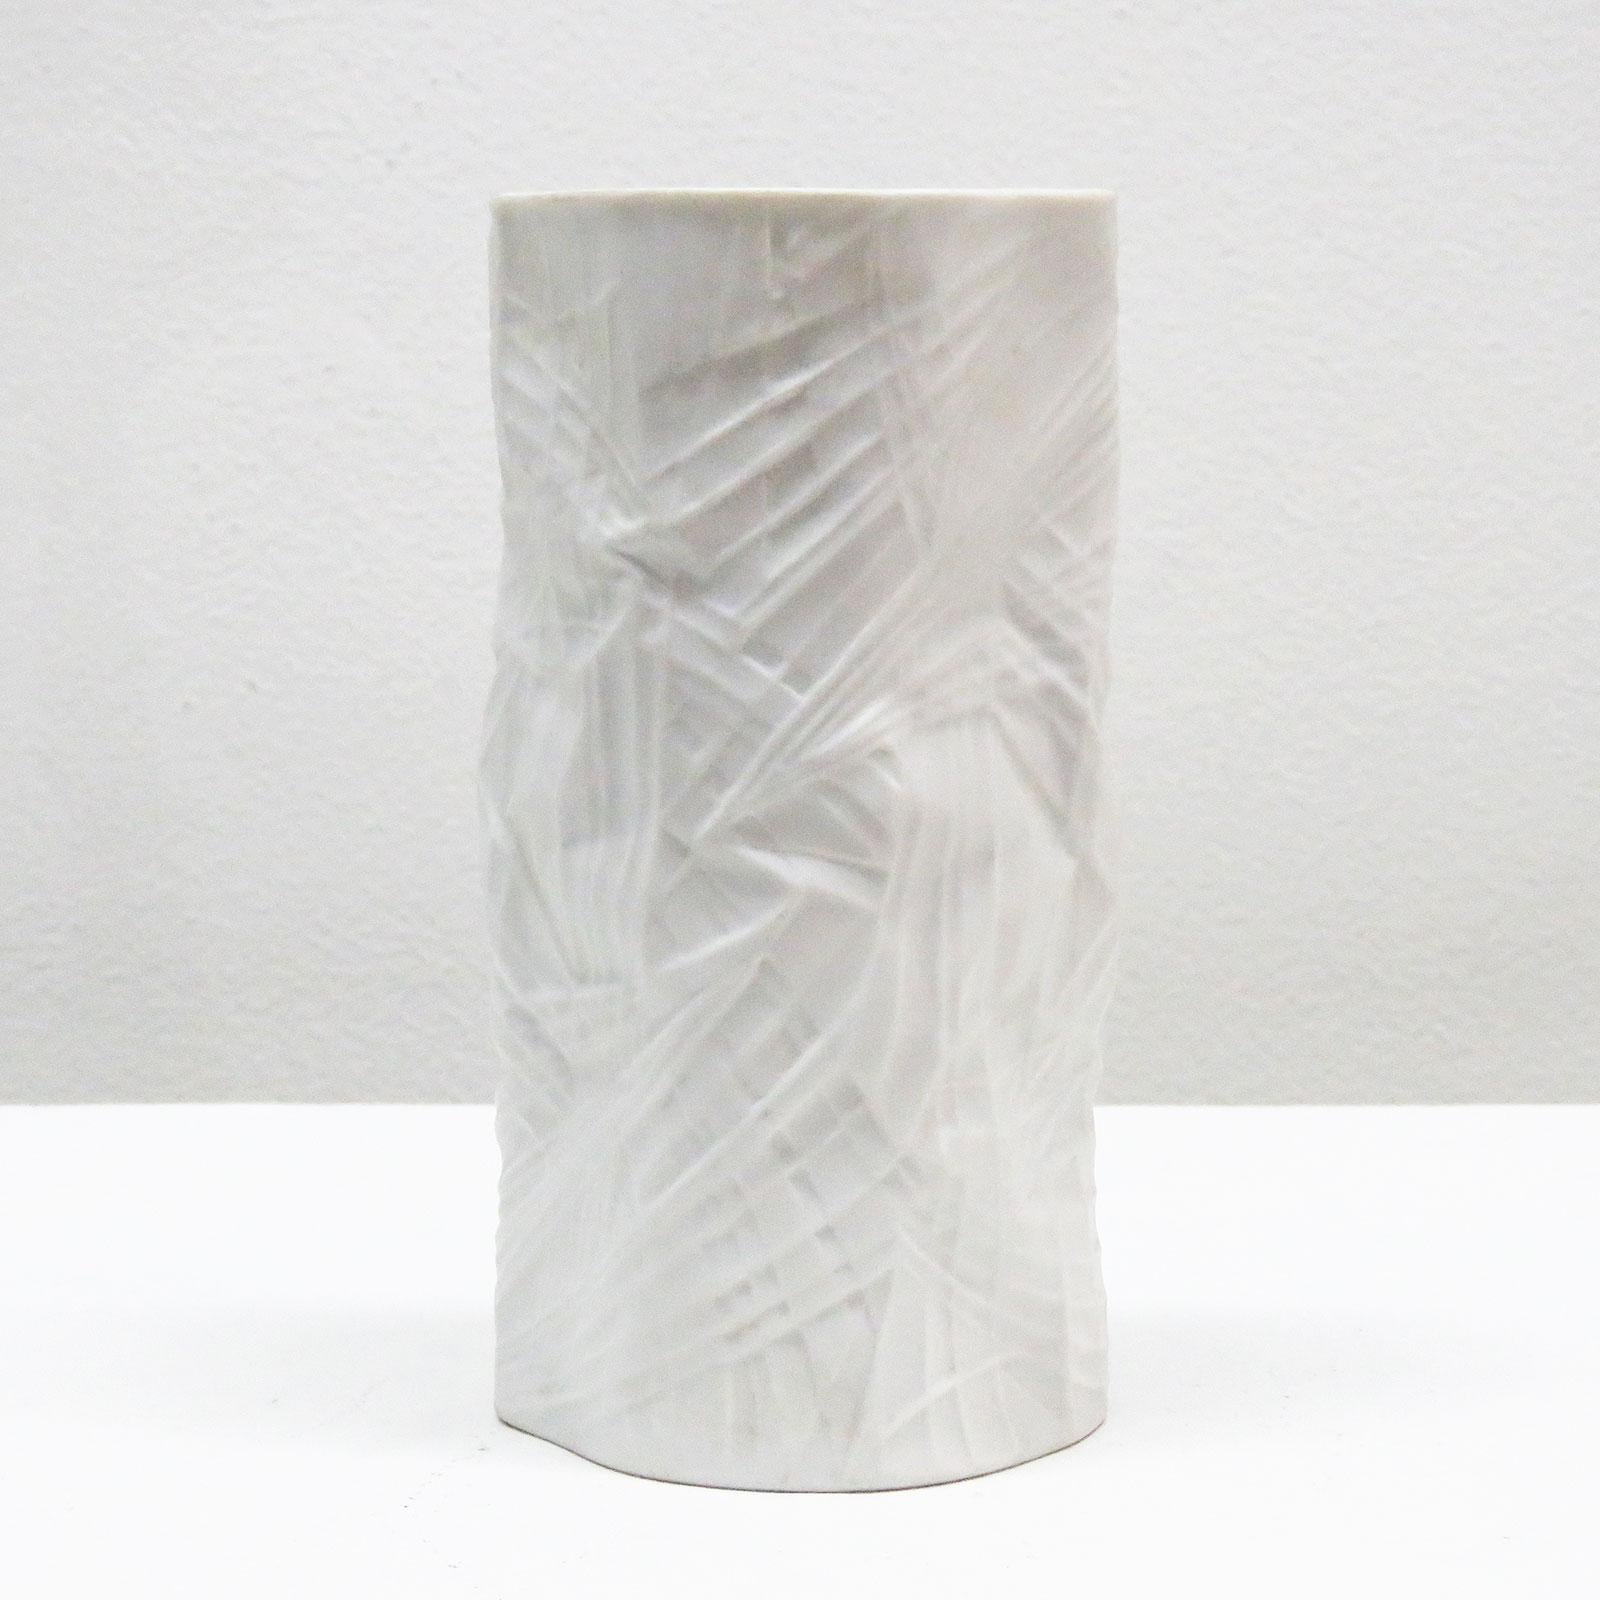 Wonderful, organic, matte porcelain vase No. 2991 by Martin Freyer for Rosenthal Studioline, Germany with a wrapped textile pattern look and glazed interior, marked.